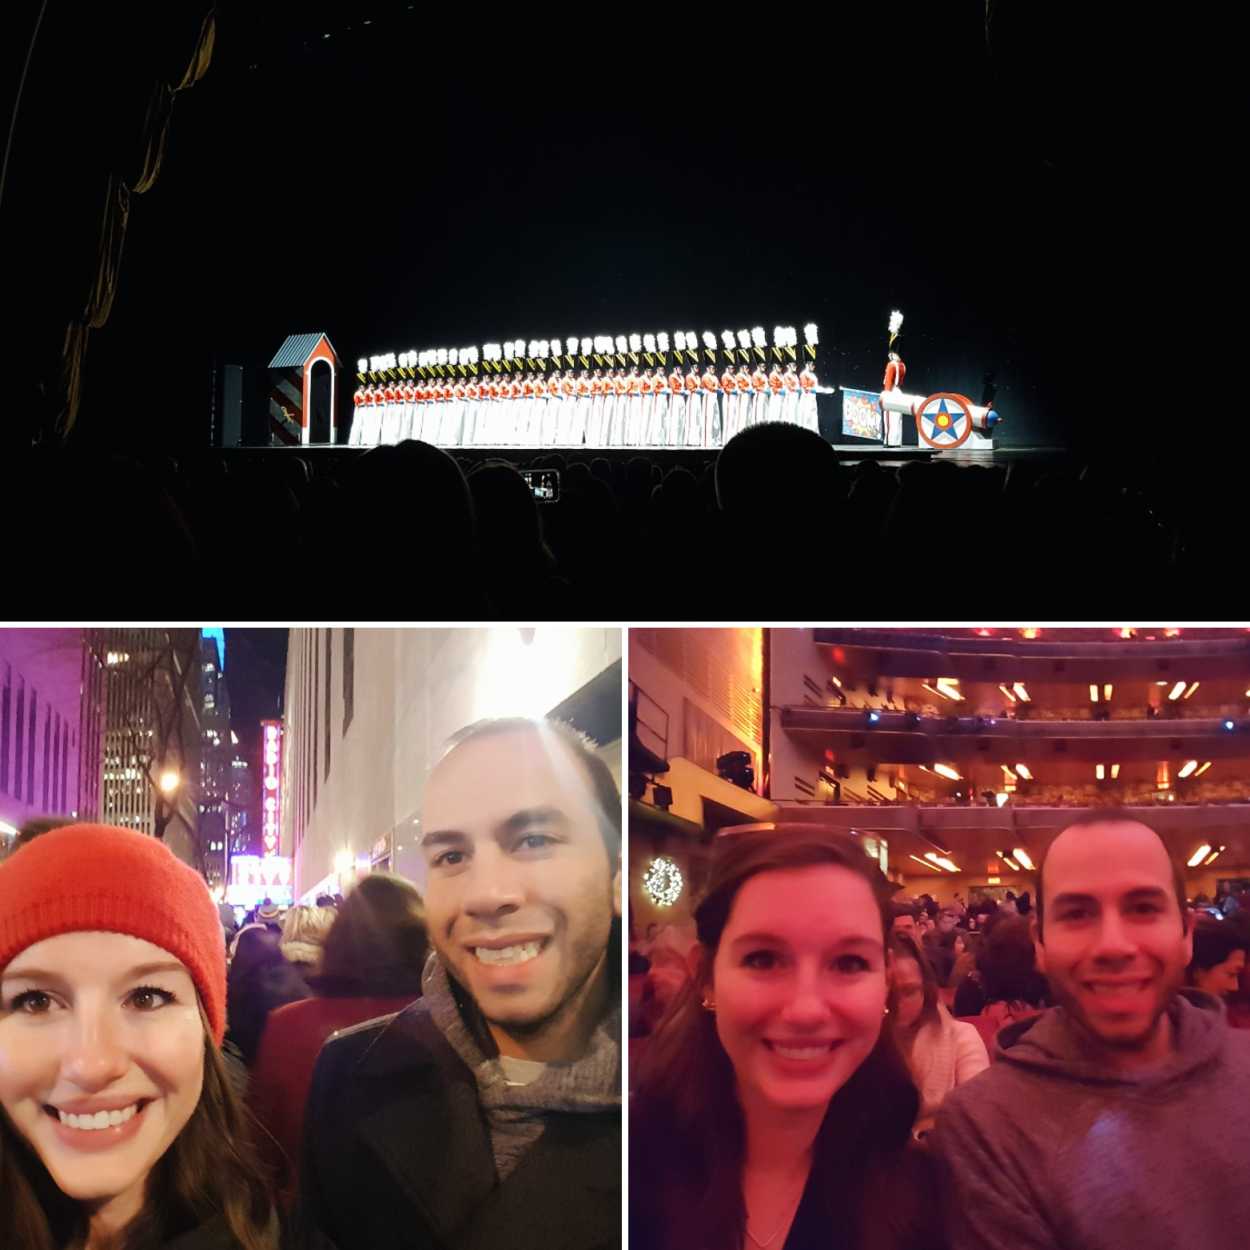 Collage of the Rockettes performance and Alyssa and Michael in selfies